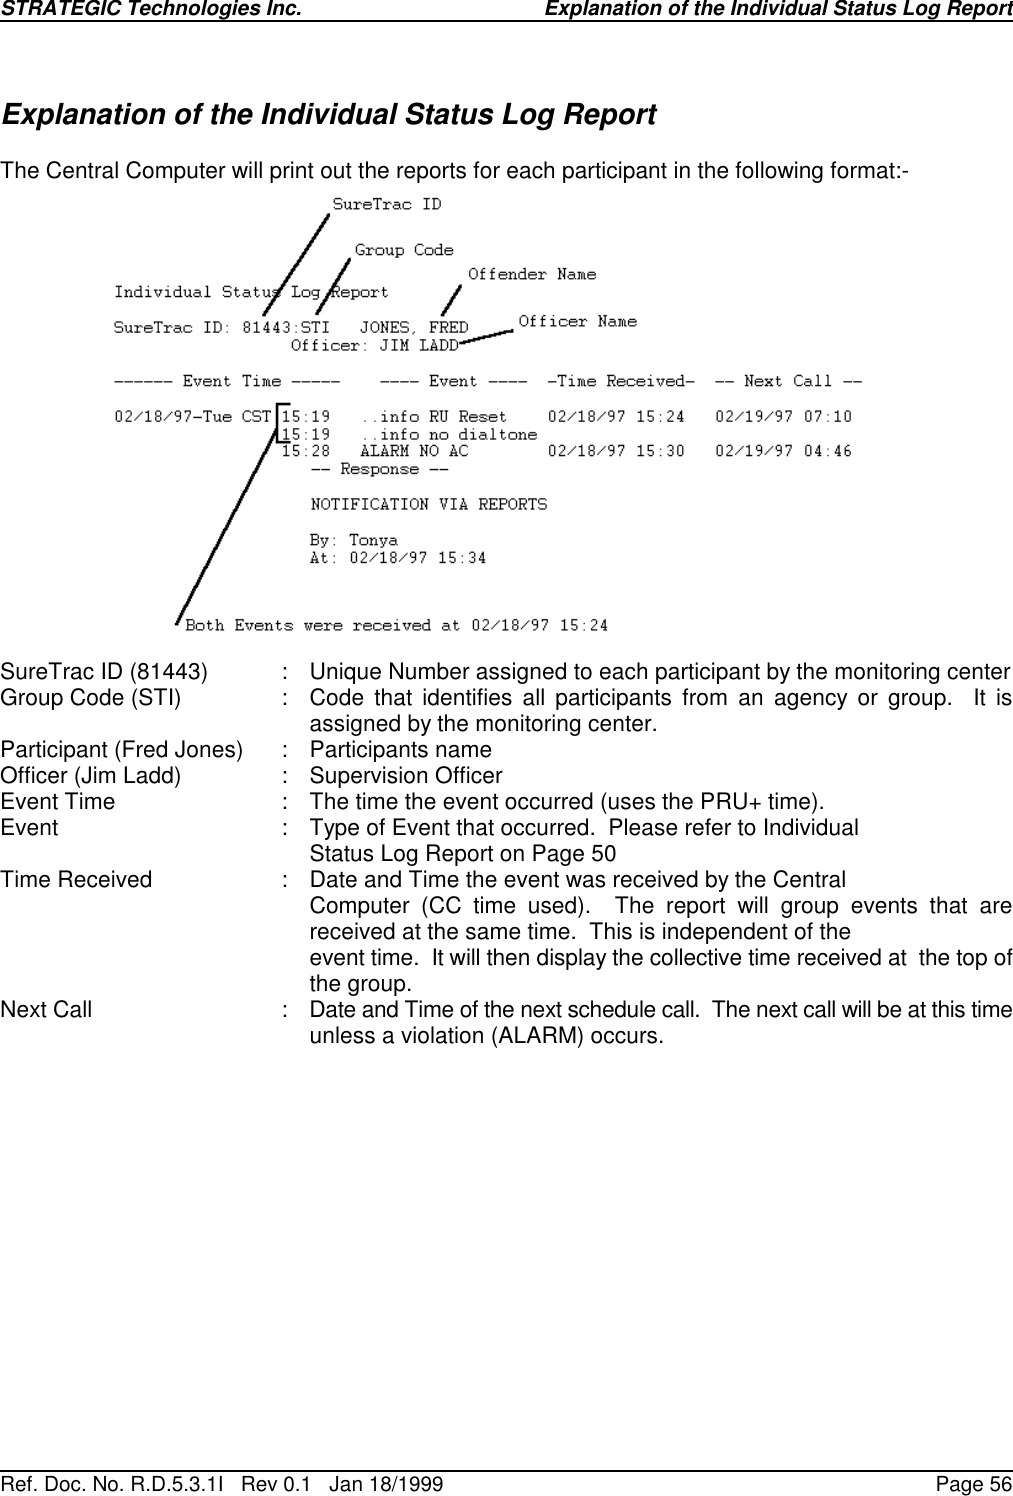 STRATEGIC Technologies Inc.Ref. Doc. No. R.D.5.3.1I   Rev 0.1   Jan 18/1999Explanation of the Individual Status Log ReportPage 56Explanation of the Individual Status Log ReportThe Central Computer will print out the reports for each participant in the following format:-SureTrac ID (81443) : Unique Number assigned to each participant by the monitoring centerGroup Code (STI) :  Code that identifies all participants from an agency or group.  It isassigned by the monitoring center.Participant (Fred Jones) :  Participants nameOfficer (Jim Ladd) :  Supervision OfficerEvent Time  :  The time the event occurred (uses the PRU+ time).Event :  Type of Event that occurred.  Please refer to Individual   Status Log Report on Page 50Time Received :  Date and Time the event was received by the Central   Computer (CC time used).  The report will group events that arereceived at the same time.  This is independent of the   event time.  It will then display the collective time received at  the top ofthe group.Next Call :  Date and Time of the next schedule call.  The next call will be at this timeunless a violation (ALARM) occurs.